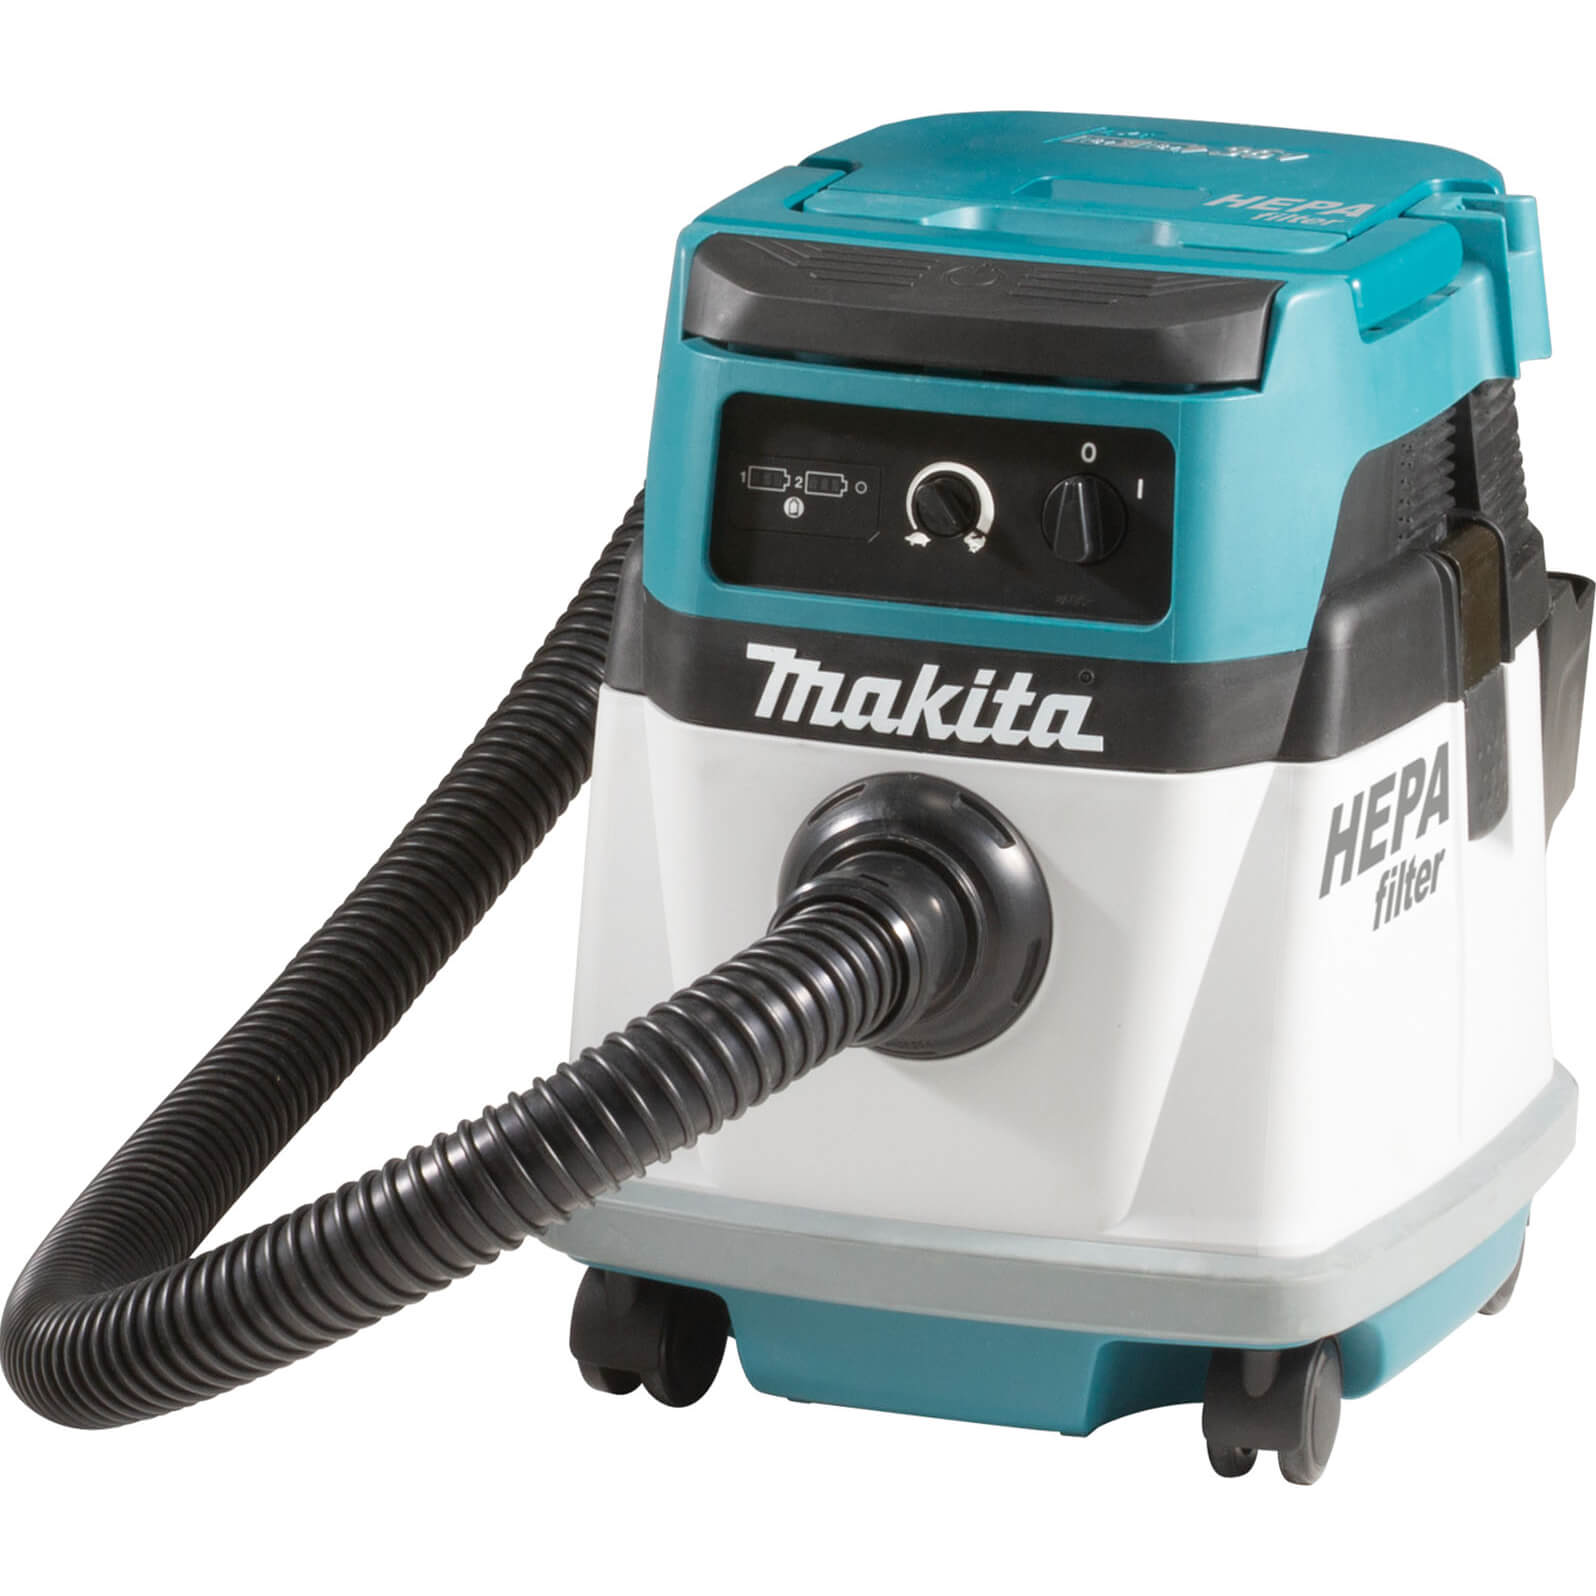 Photos - Vacuum Cleaner Makita DVC151L Twin 18v LXT Cordless / Corded Dust Extractor 240v No Batte 